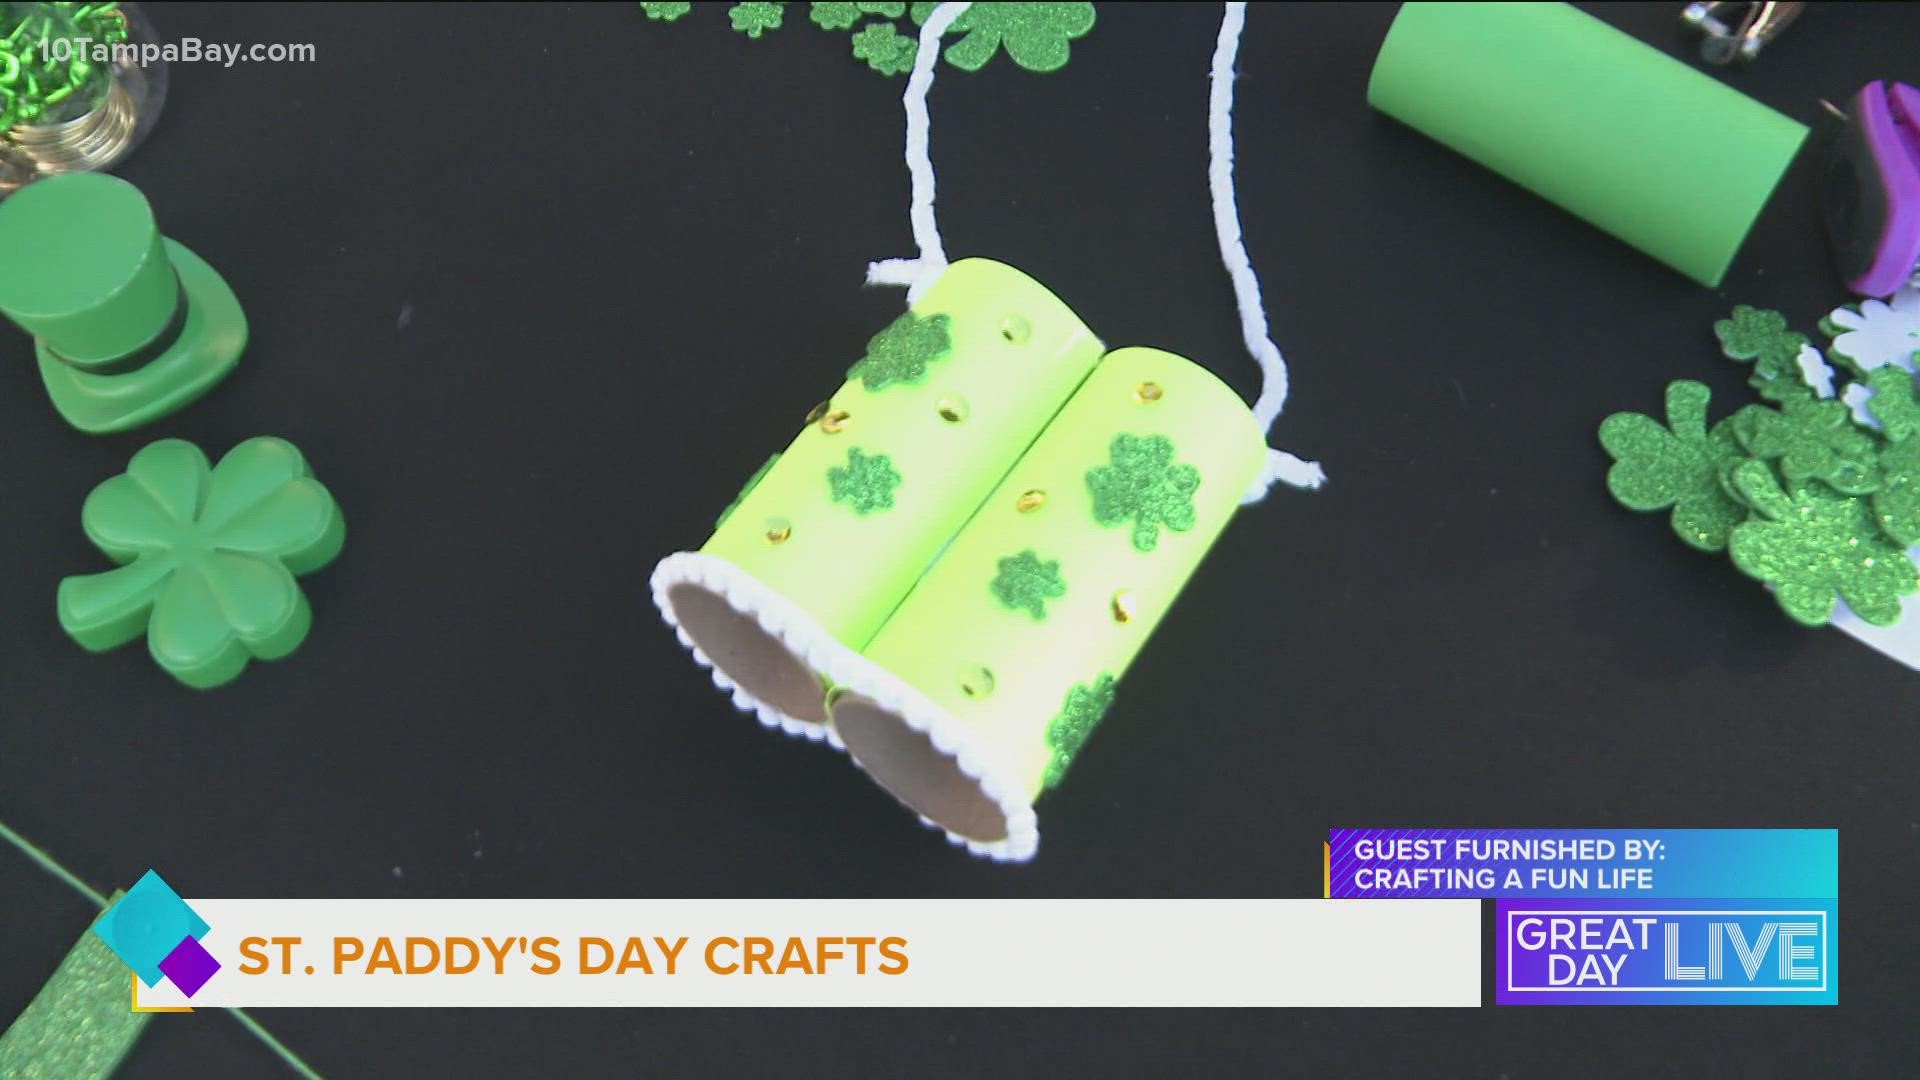 Author of the blog Crafting a Fun Life is back with some fun crafts you can do with your little leprechauns